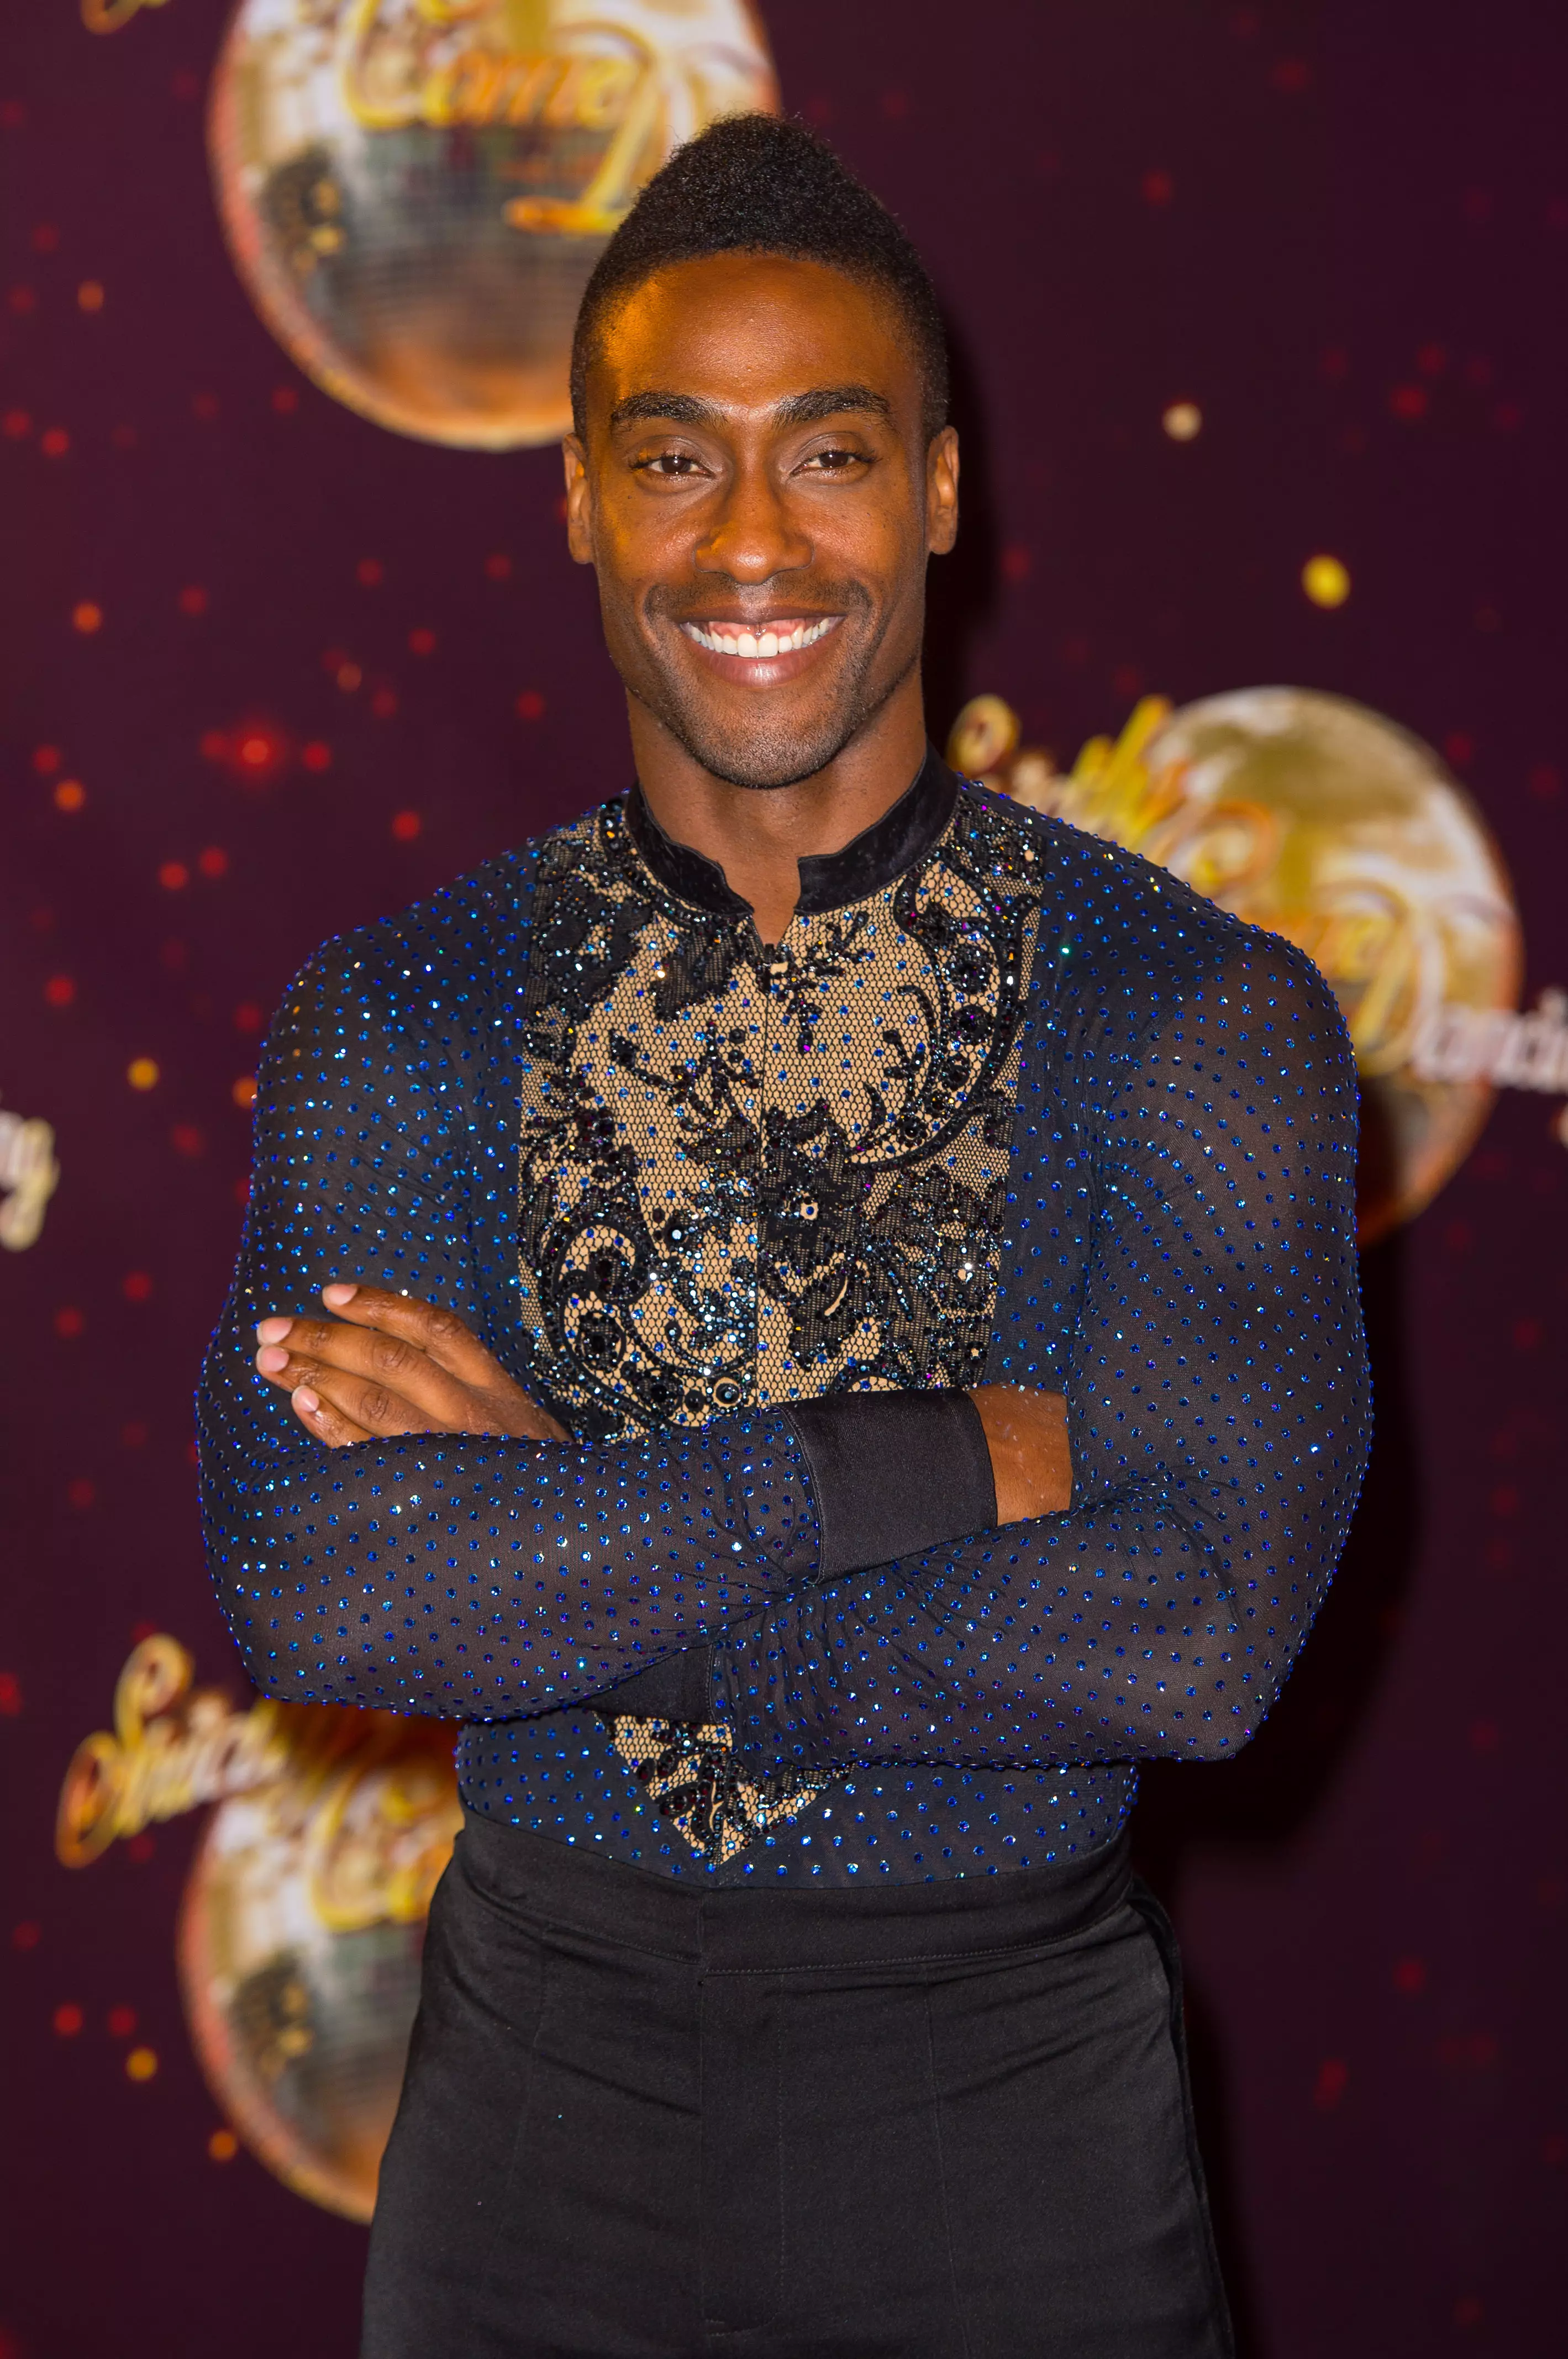 Simon Webbe has always been known for his ripping muscles (